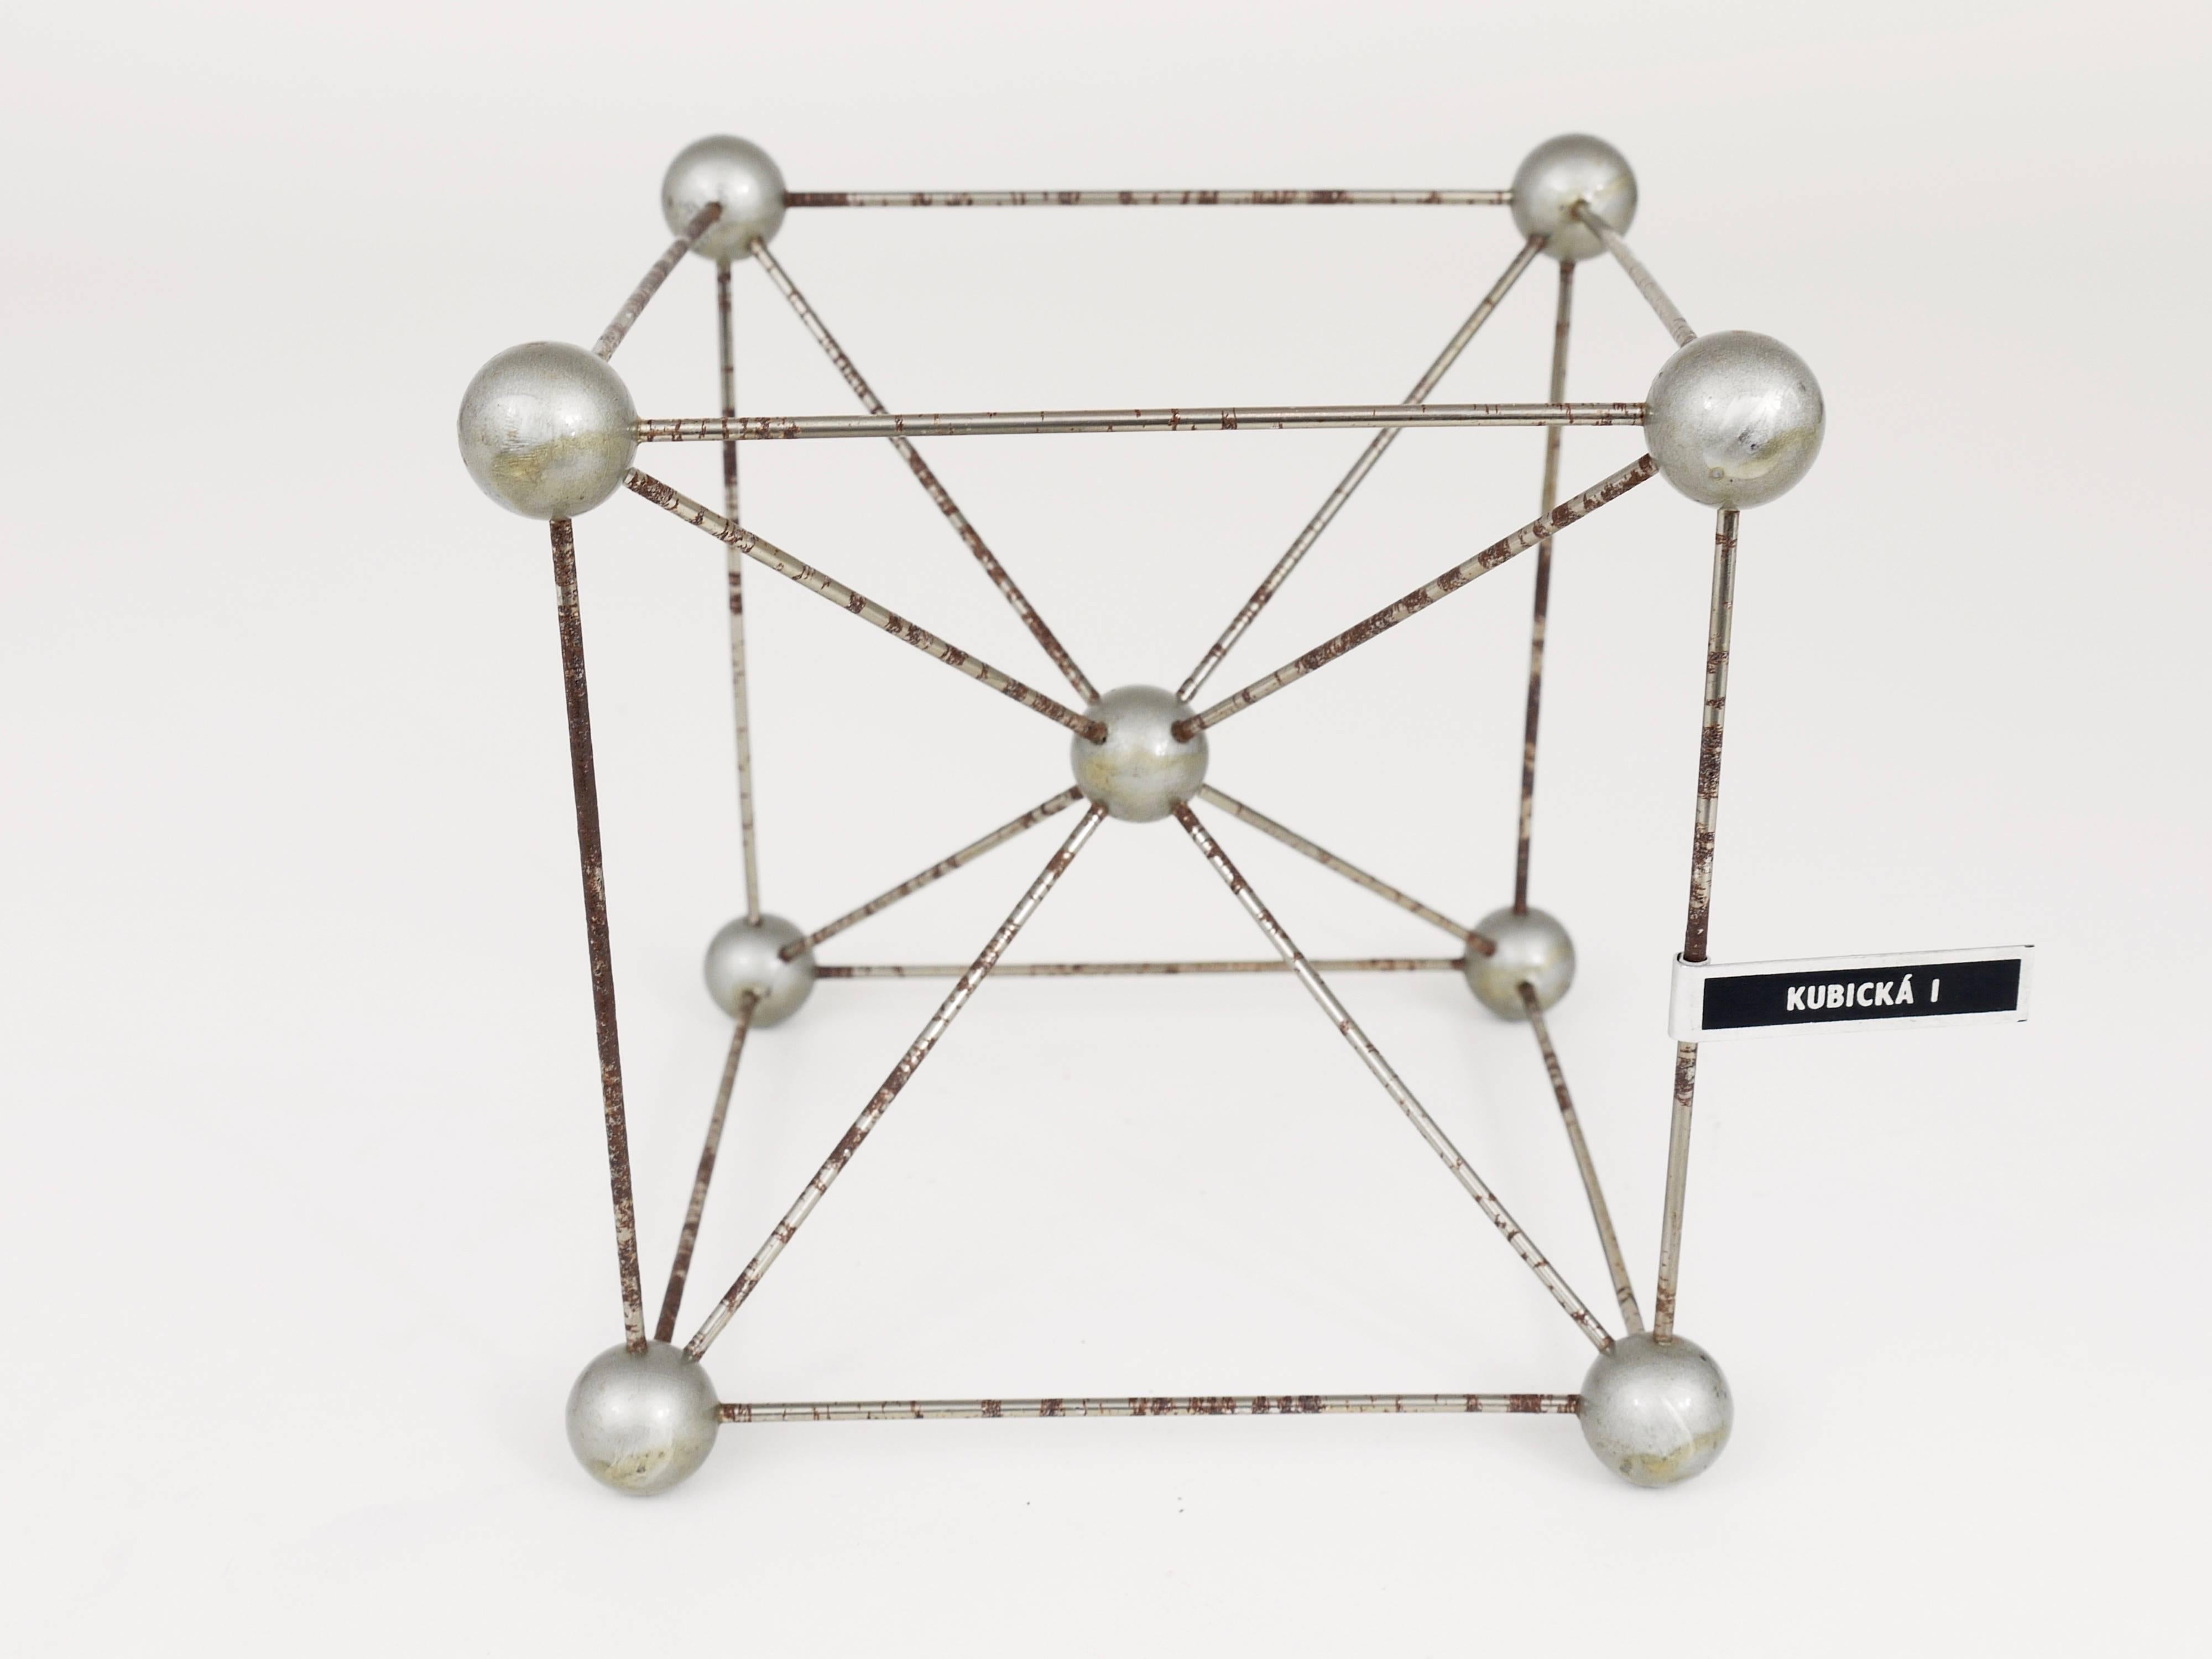 Slovak Set of Six Different Scientific Crystal Molecular Models from the 1950s